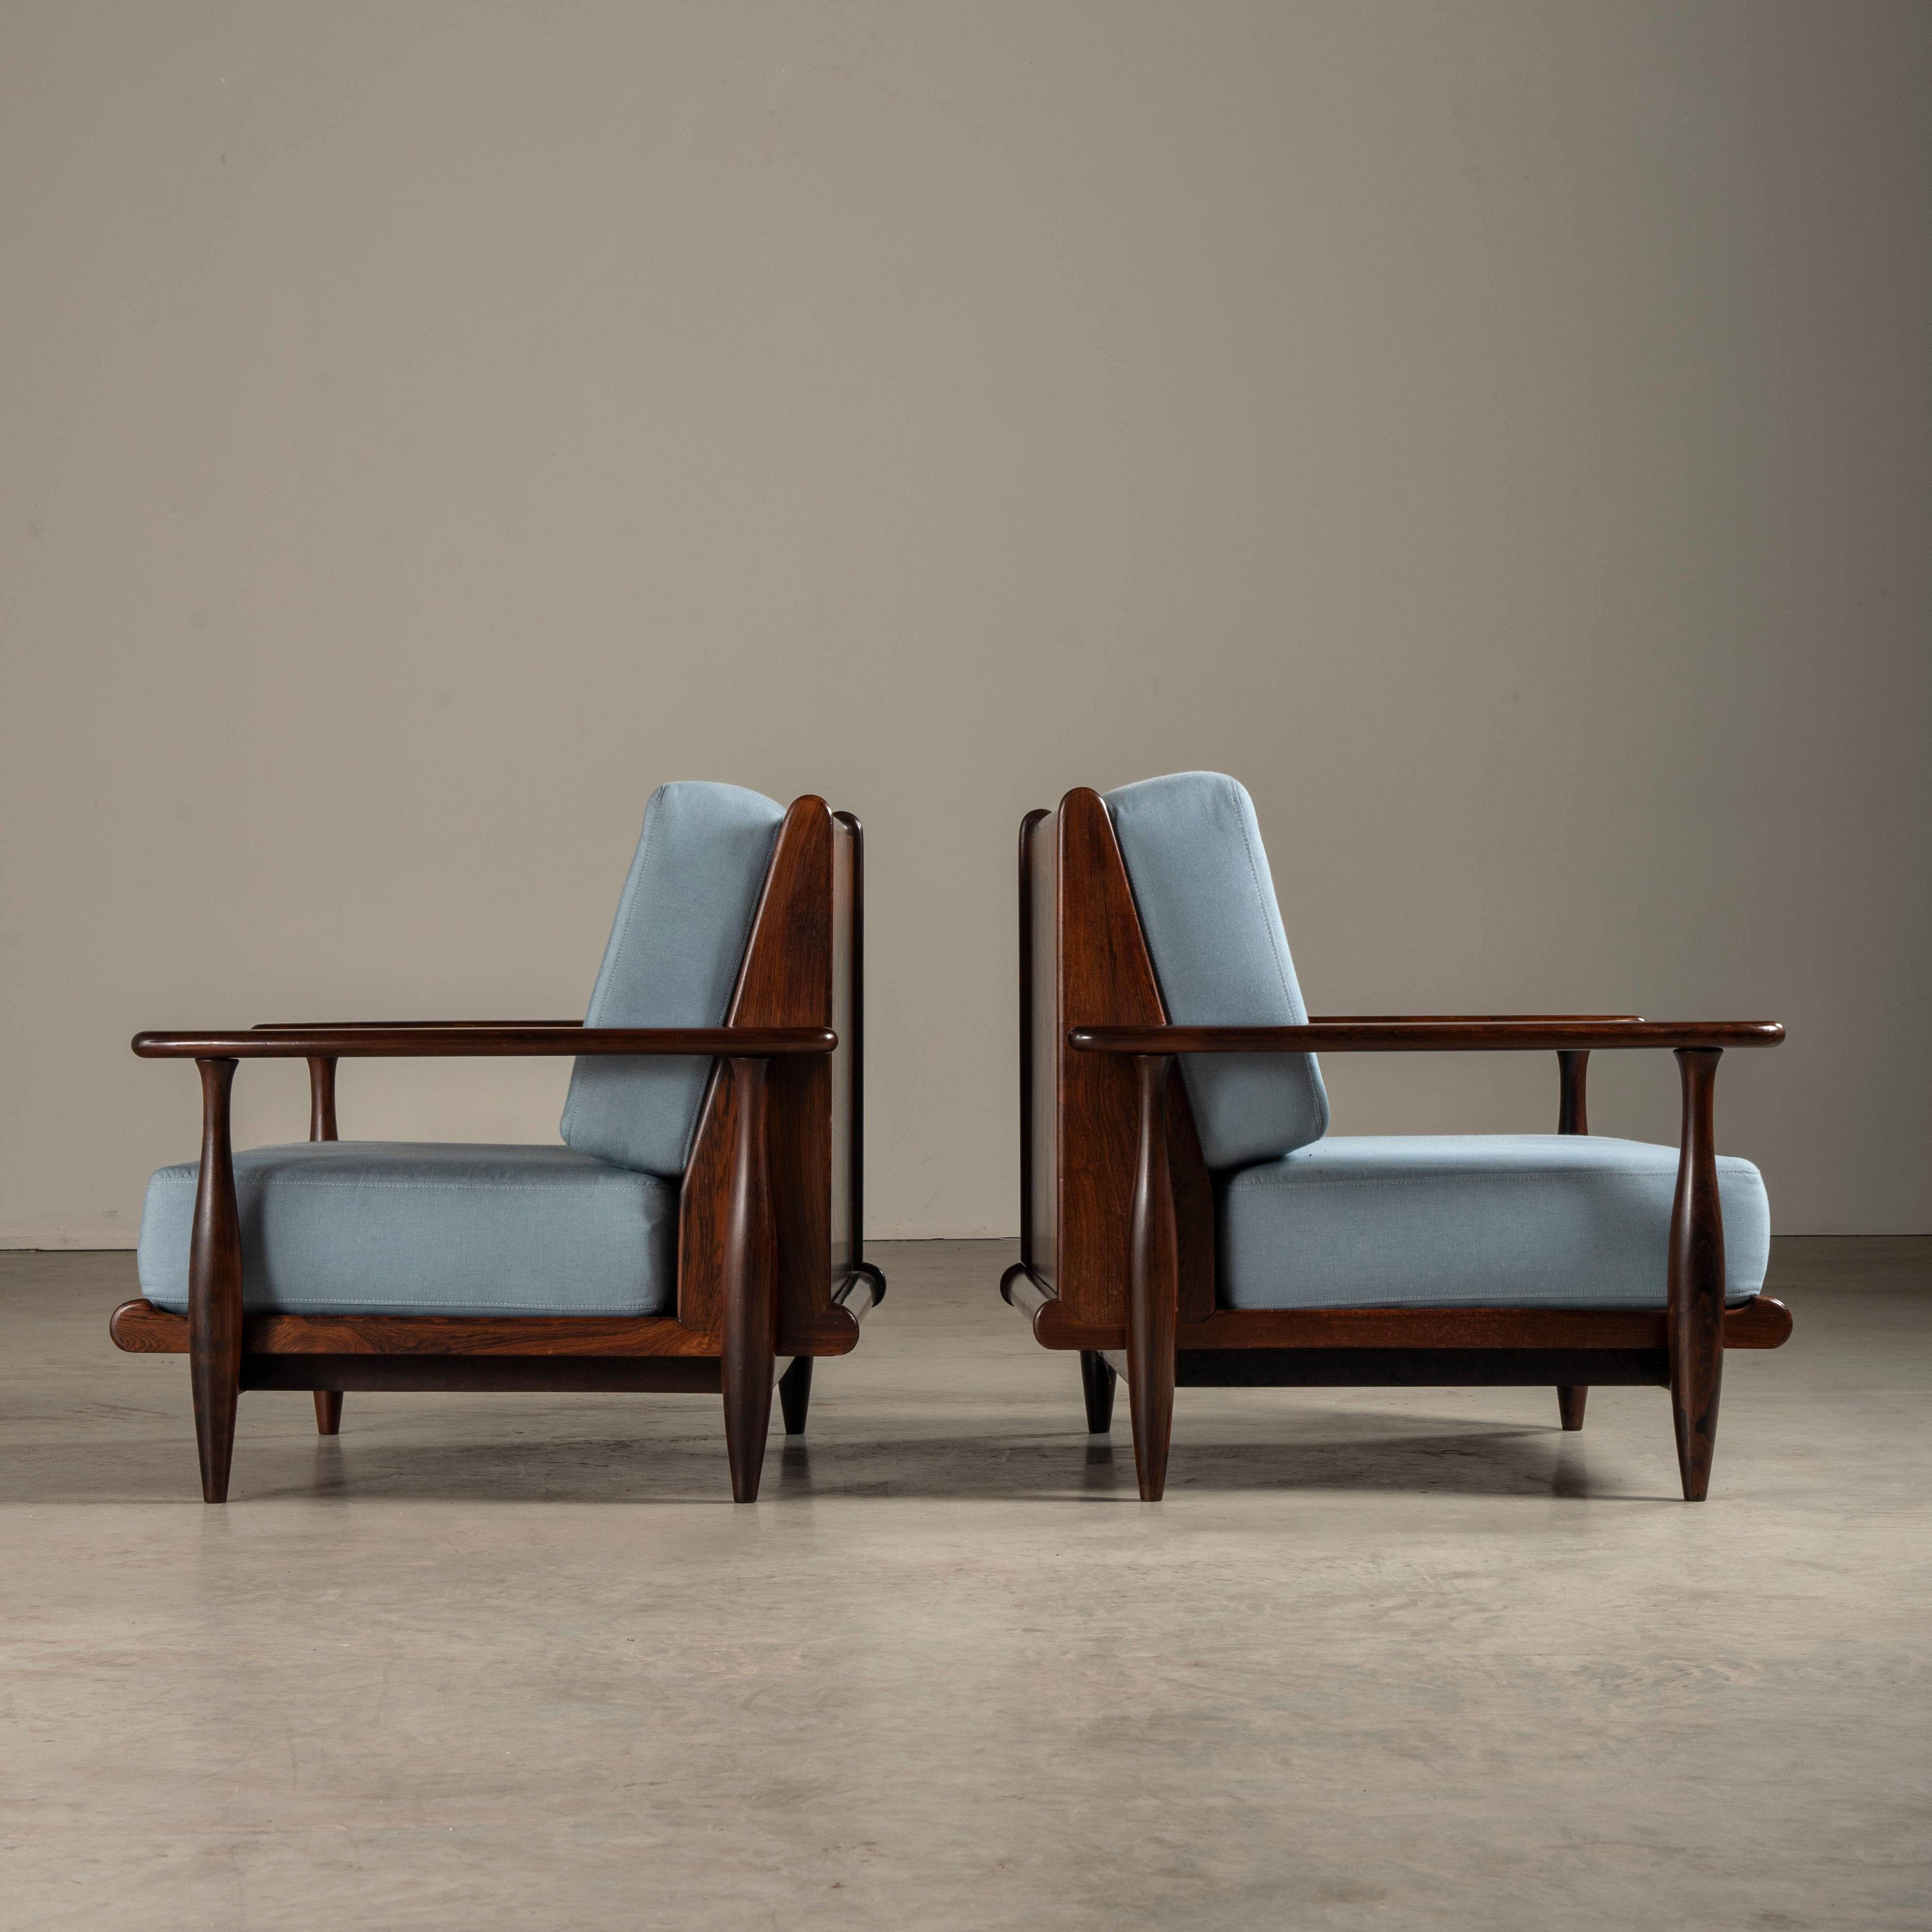 Pair of Lounge Chairs, by Liceu de Artes e Ofícios, Brazilian Mid-Century Modern For Sale 5